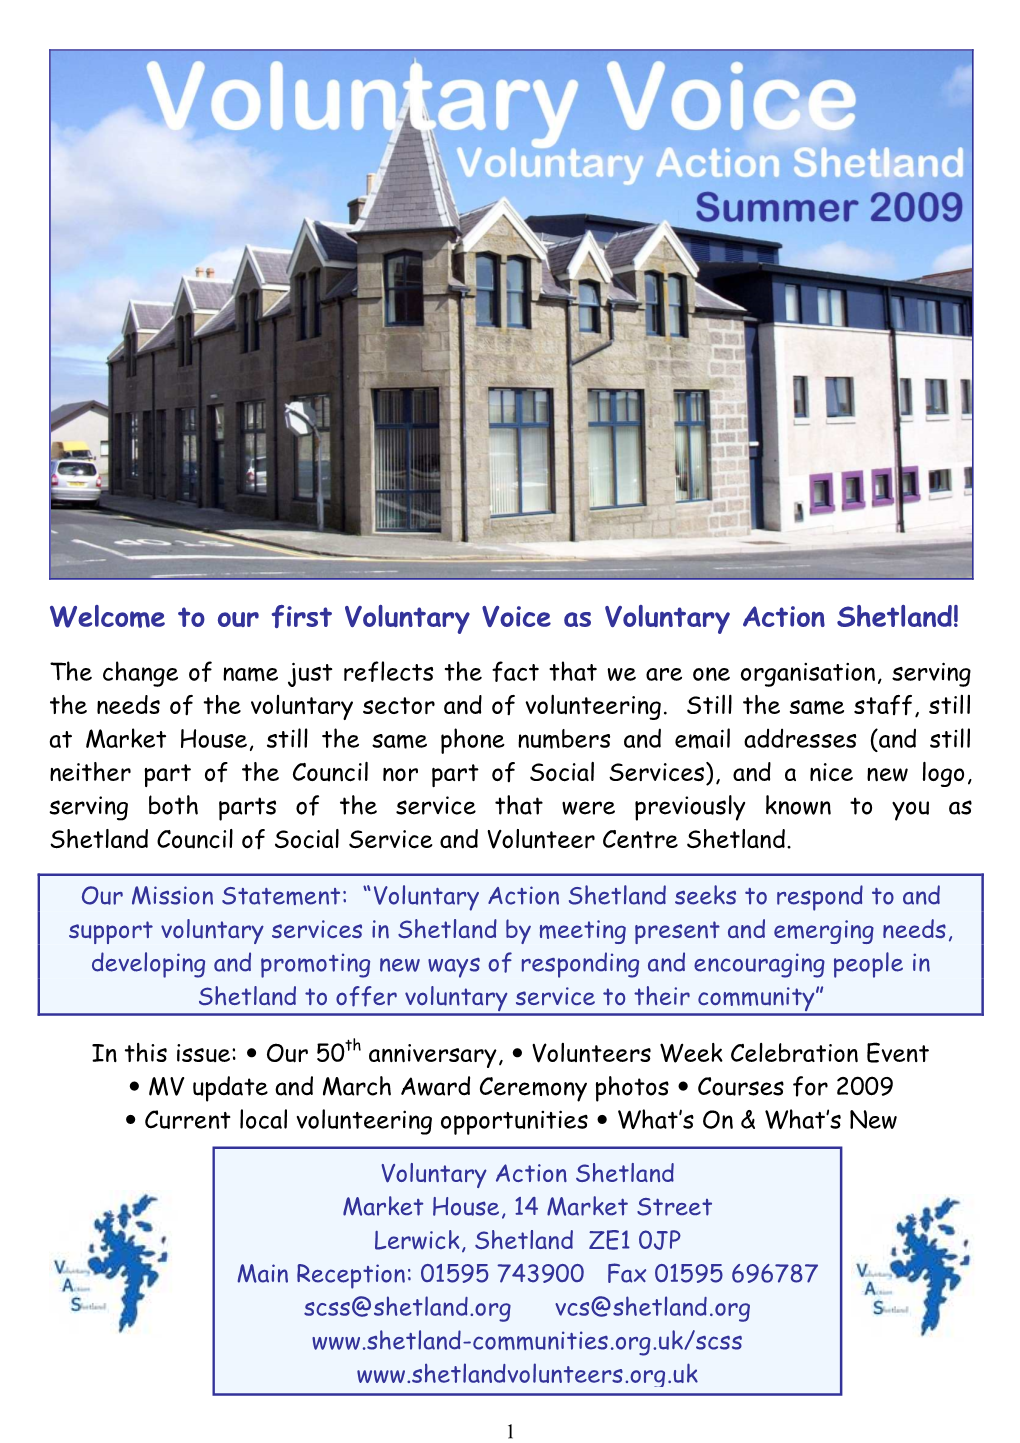 Welcome to Our First Voluntary Voice As Voluntary Action Shetland!